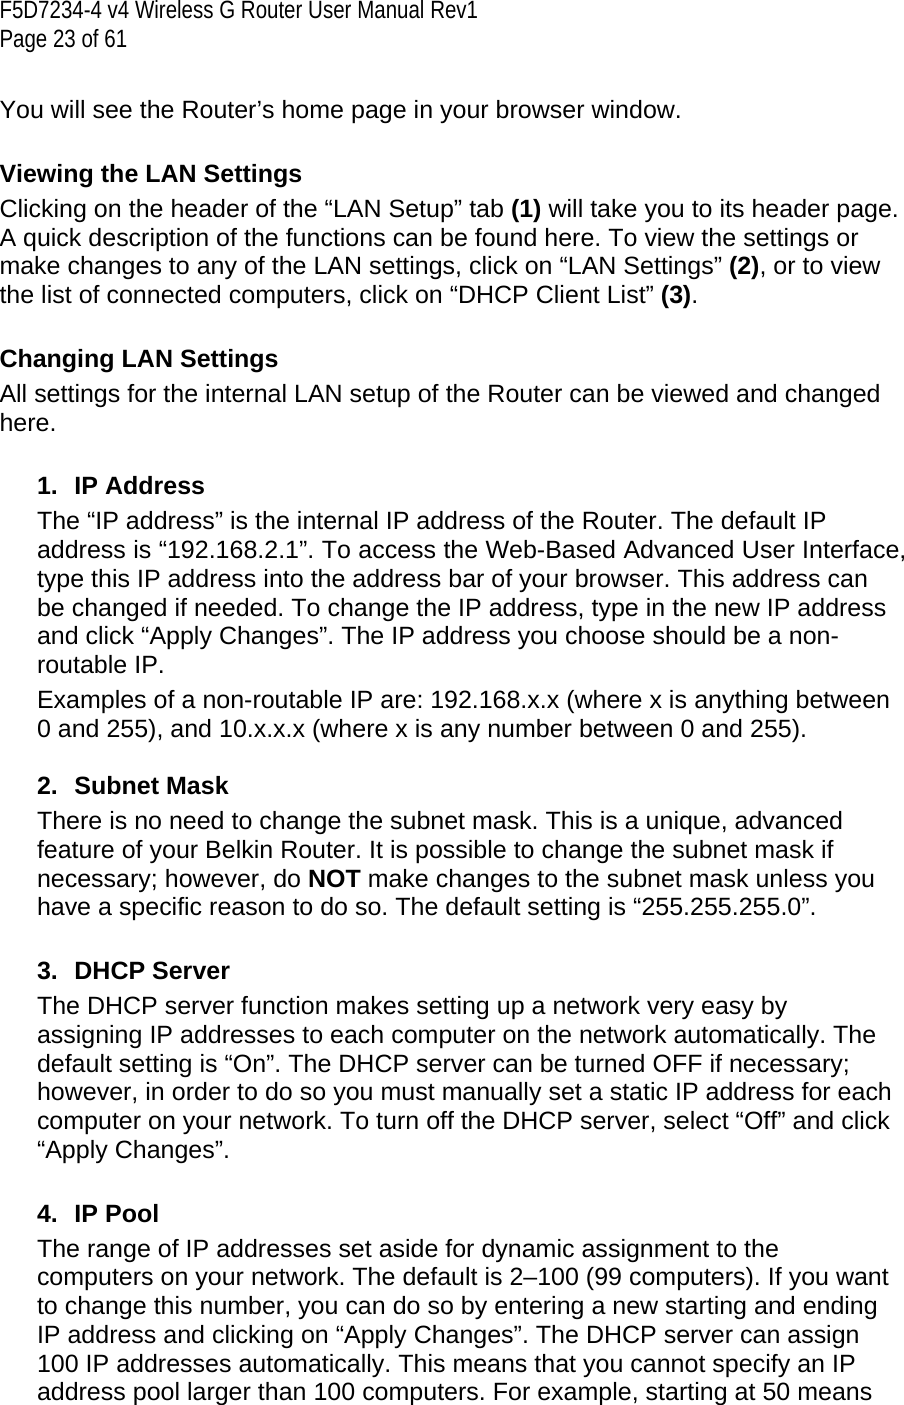 F5D7234-4 v4 Wireless G Router User Manual Rev1  Page 23 of 61   You will see the Router’s home page in your browser window.   Viewing the LAN Settings Clicking on the header of the “LAN Setup” tab (1) will take you to its header page. A quick description of the functions can be found here. To view the settings or make changes to any of the LAN settings, click on “LAN Settings” (2), or to view the list of connected computers, click on “DHCP Client List” (3).  Changing LAN Settings All settings for the internal LAN setup of the Router can be viewed and changed here.   1. IP Address The “IP address” is the internal IP address of the Router. The default IP address is “192.168.2.1”. To access the Web-Based Advanced User Interface, type this IP address into the address bar of your browser. This address can be changed if needed. To change the IP address, type in the new IP address and click “Apply Changes”. The IP address you choose should be a non-routable IP.  Examples of a non-routable IP are: 192.168.x.x (where x is anything between 0 and 255), and 10.x.x.x (where x is any number between 0 and 255).  2. Subnet Mask There is no need to change the subnet mask. This is a unique, advanced feature of your Belkin Router. It is possible to change the subnet mask if necessary; however, do NOT make changes to the subnet mask unless you have a specific reason to do so. The default setting is “255.255.255.0”.  3. DHCP Server The DHCP server function makes setting up a network very easy by assigning IP addresses to each computer on the network automatically. The default setting is “On”. The DHCP server can be turned OFF if necessary; however, in order to do so you must manually set a static IP address for each computer on your network. To turn off the DHCP server, select “Off” and click “Apply Changes”.  4. IP Pool The range of IP addresses set aside for dynamic assignment to the computers on your network. The default is 2–100 (99 computers). If you want to change this number, you can do so by entering a new starting and ending IP address and clicking on “Apply Changes”. The DHCP server can assign 100 IP addresses automatically. This means that you cannot specify an IP address pool larger than 100 computers. For example, starting at 50 means 